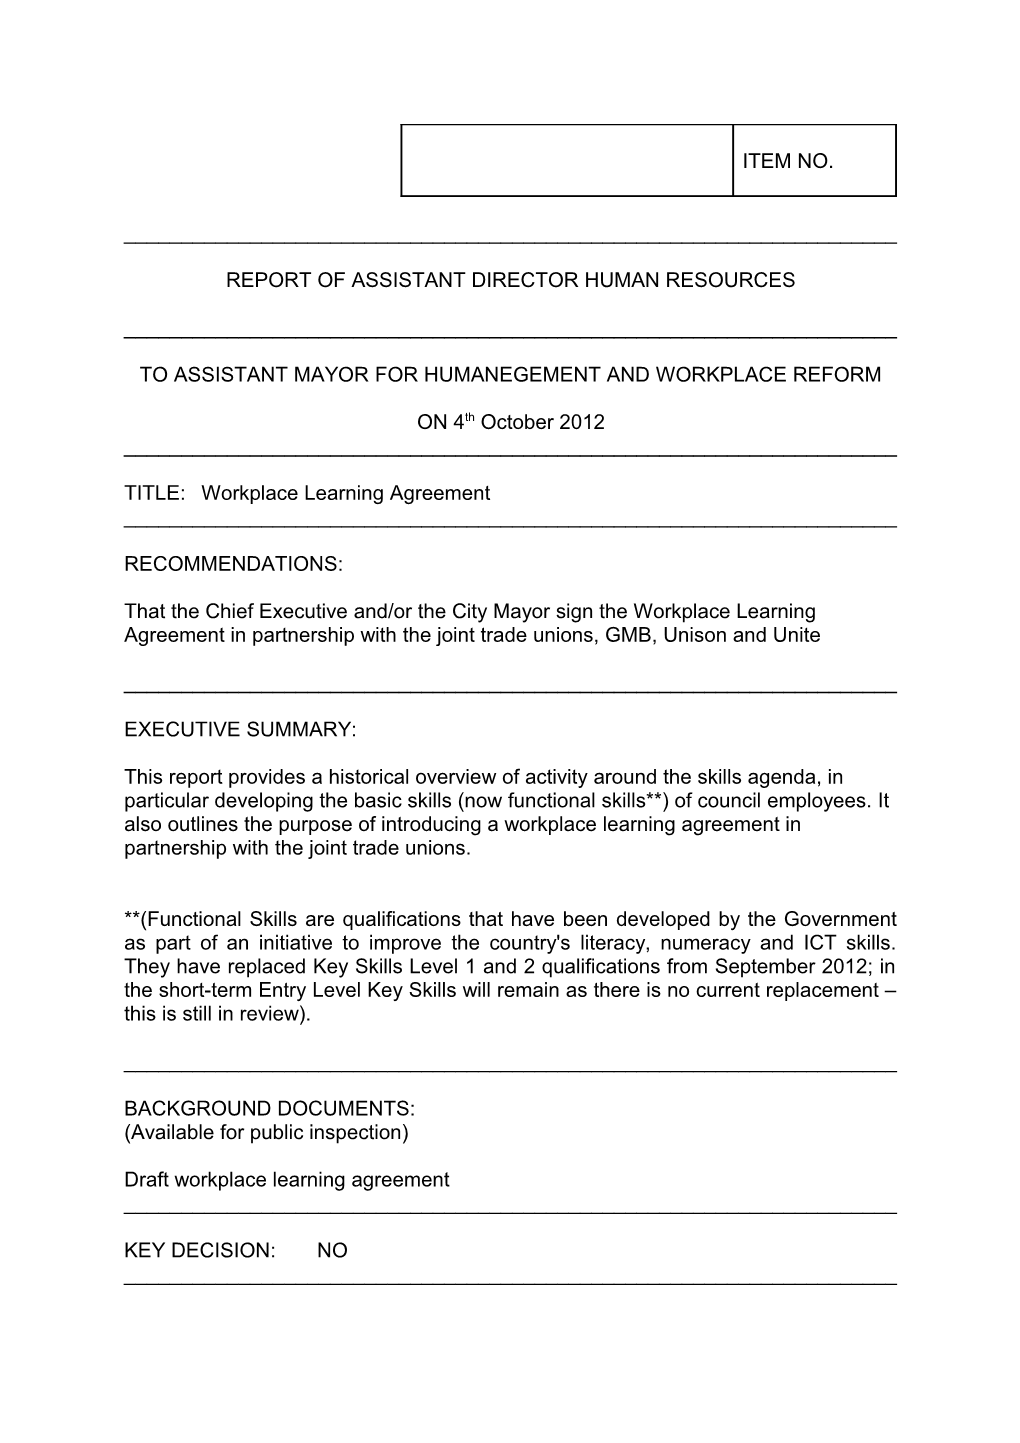 Report of Assistant Director Human Resources